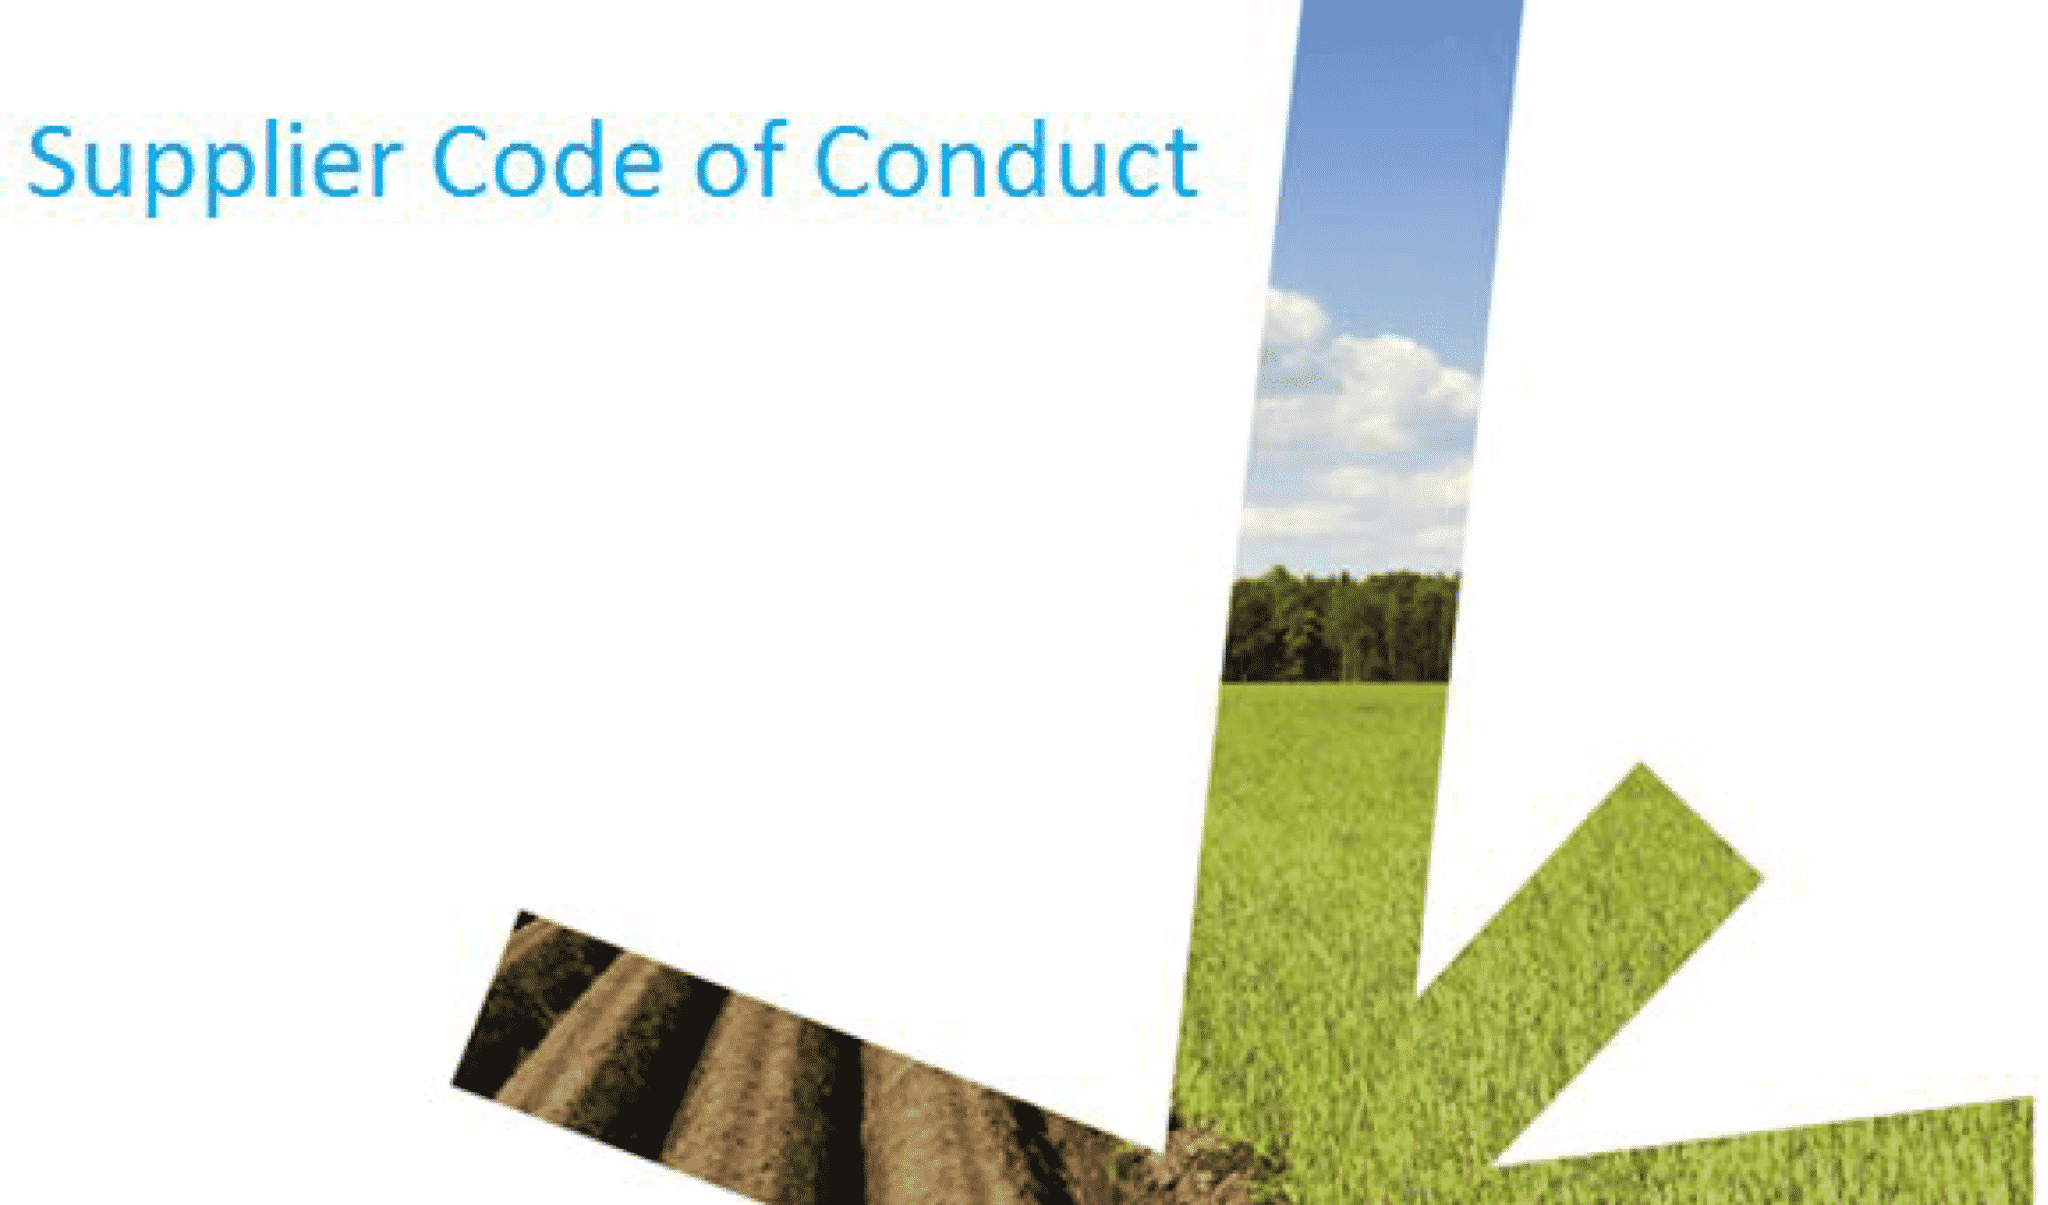 Mccain supplier code of conduct french 1 1 - Téléchargements